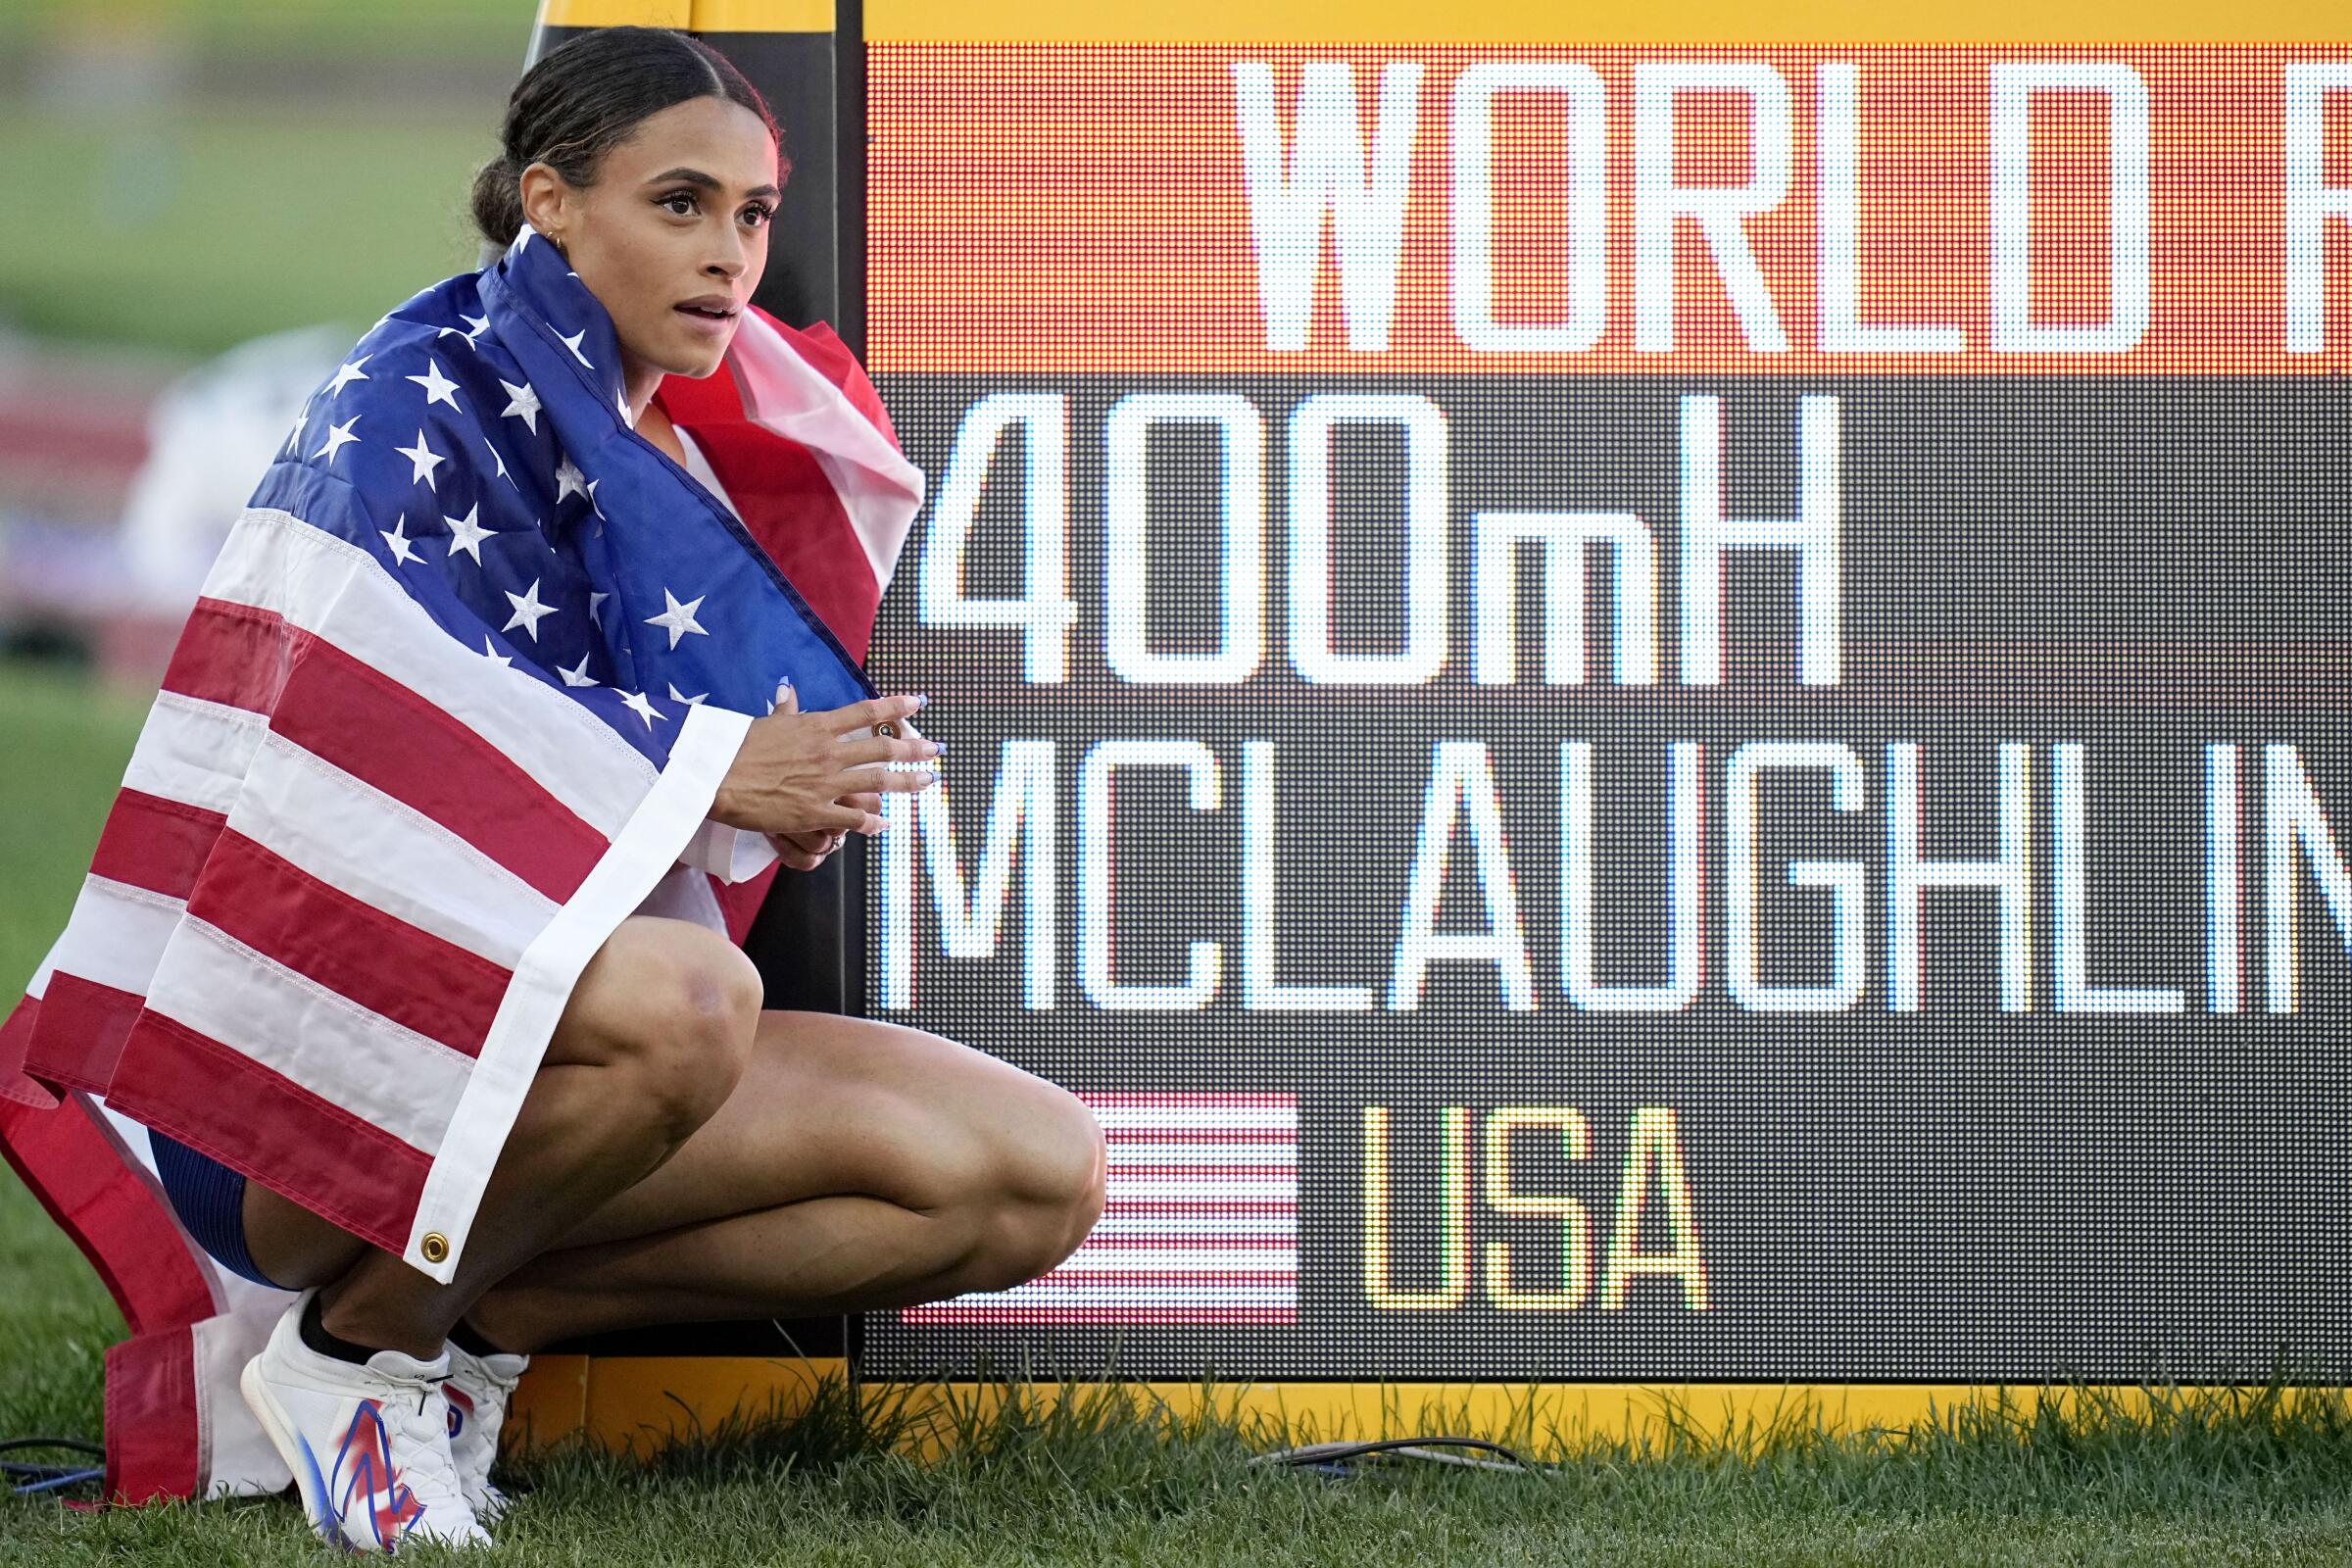 Sydney McLaughlin-Levrone beside a sign after winning the 400-meter hurdles at the 2022 World Athletics Championships.